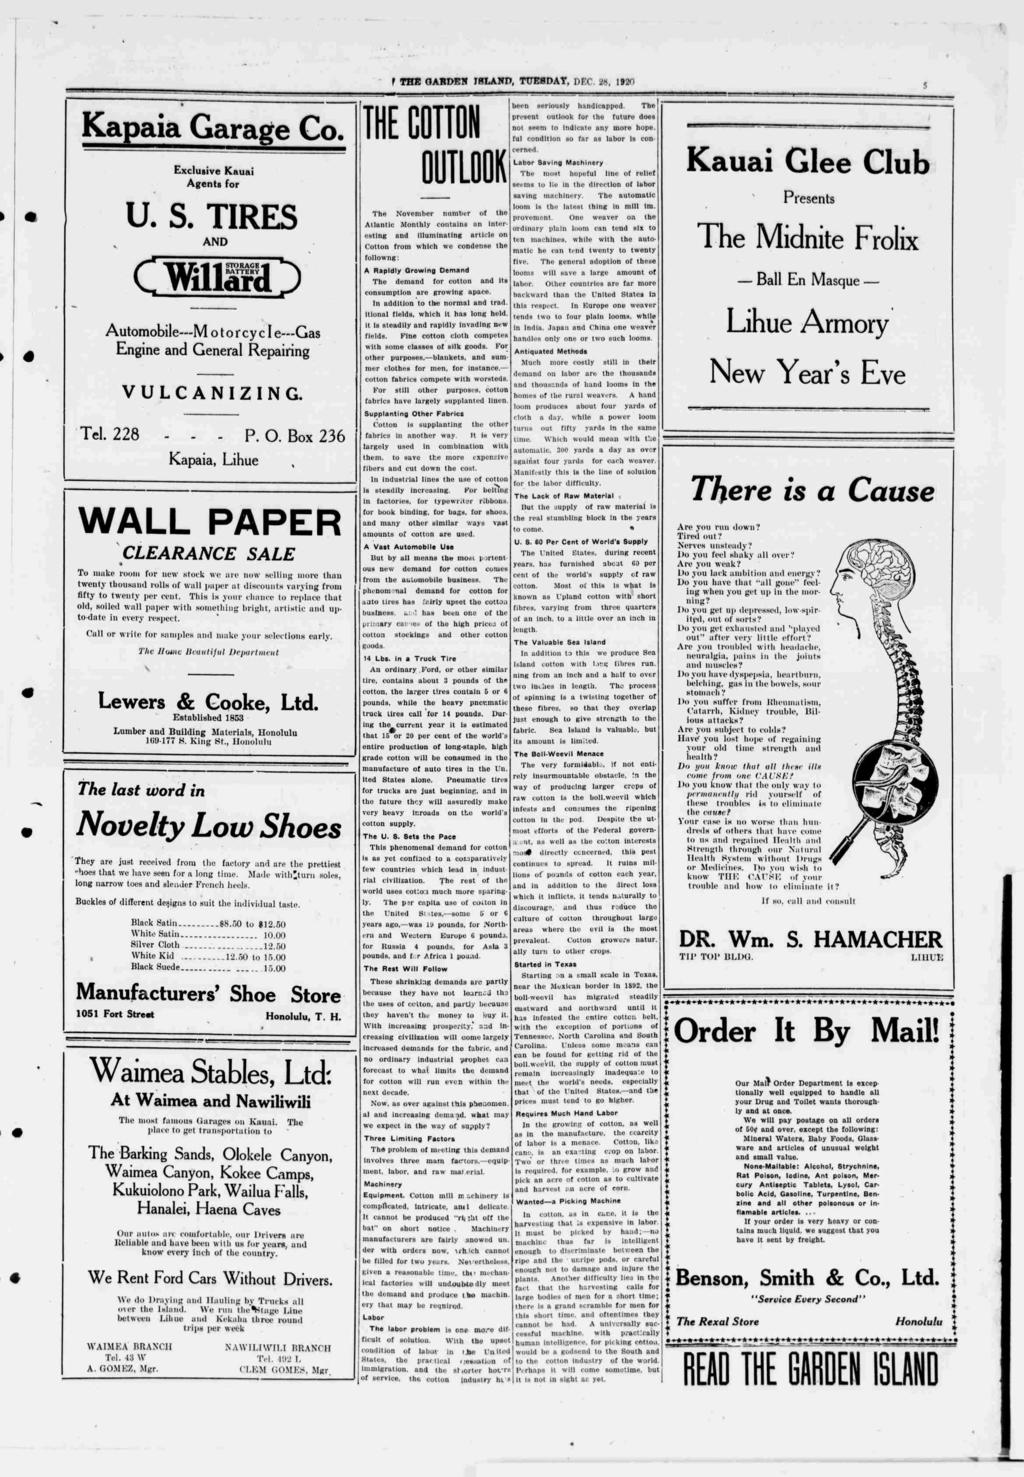 f THE GARDEN SLAND, TUESDAY, DEC. 28, 1920 c Kapaa Garage Co. Exclusve Kaua Agents for U. S. TRES AND (111) Automoble M o t o r cy c e Gas Engne and General Reparng VULCANZNG. Tel. 228 P.O.